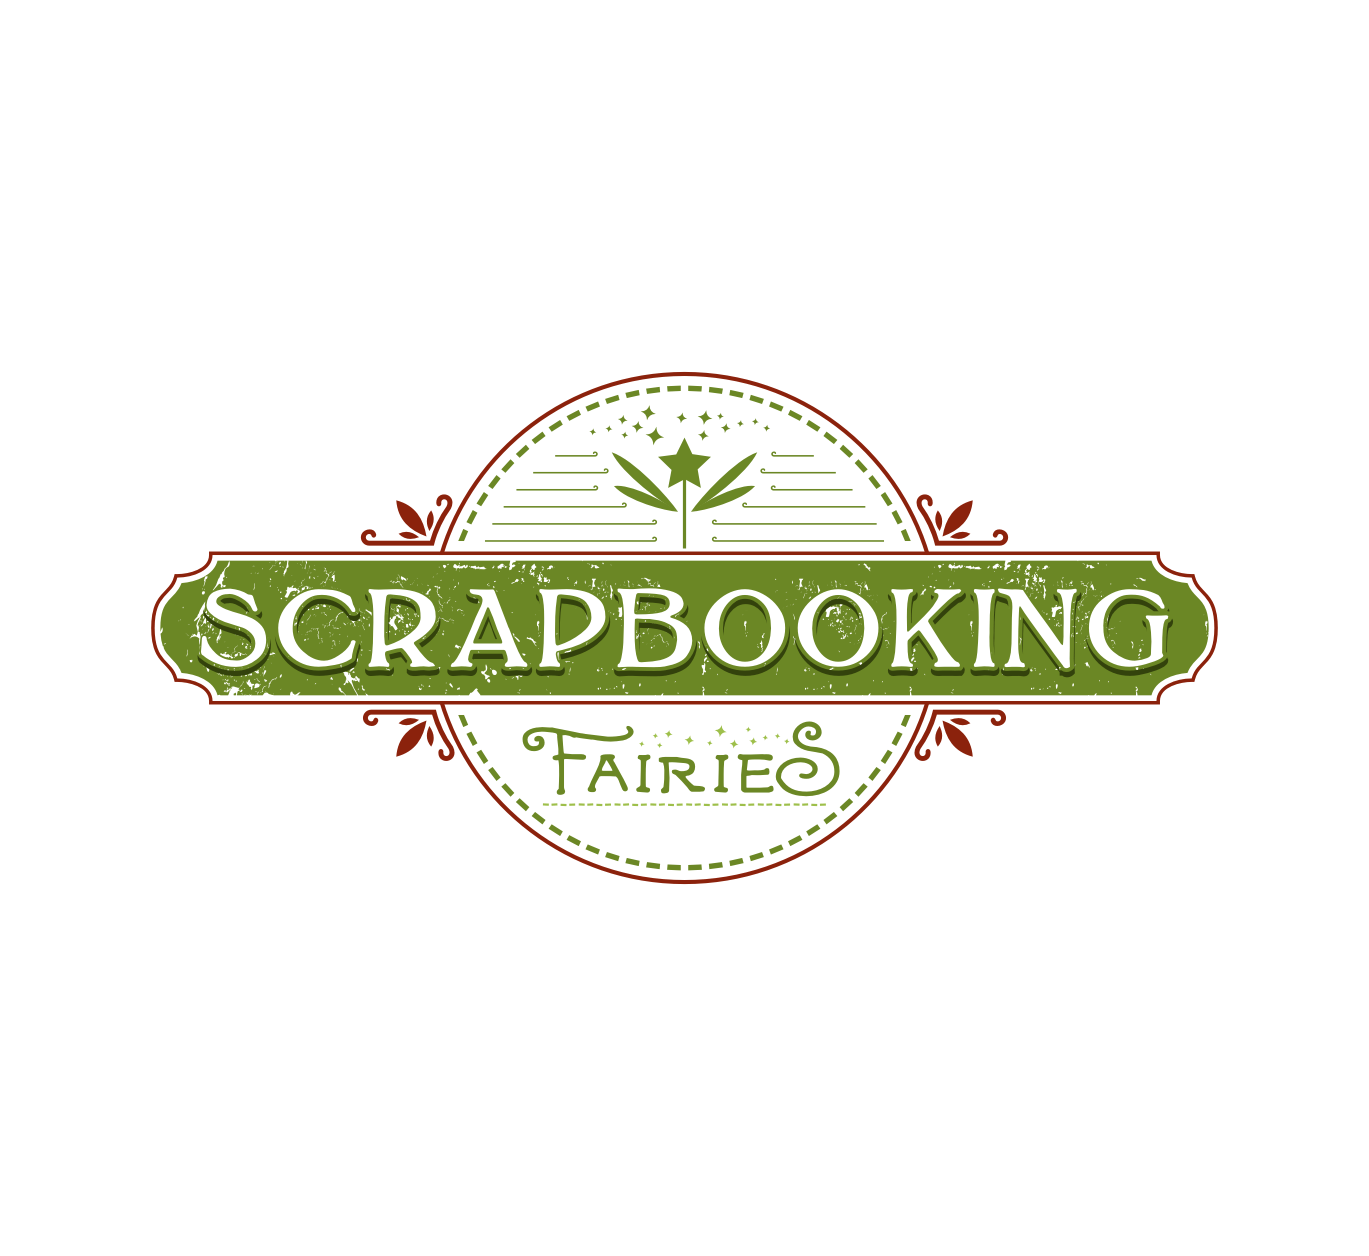 Scrapbooking Logo - Bold, Serious, Retail Logo Design for Scrapbooking Fairies by Rudy ...